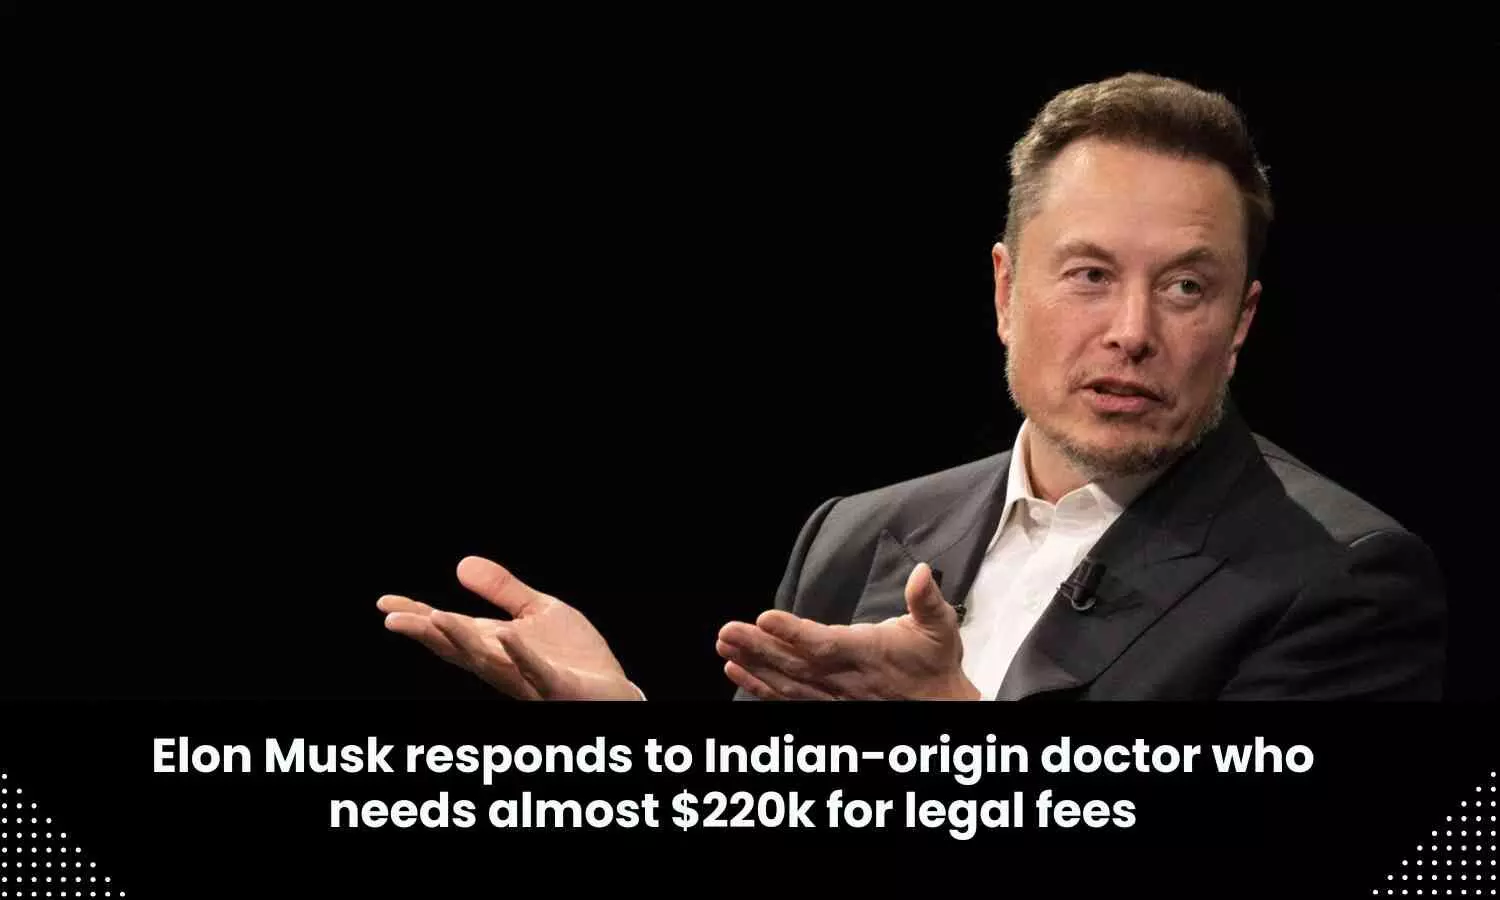 Elon Musk comes forward to help Indian origin doctor who needs almost $220k for legal fees